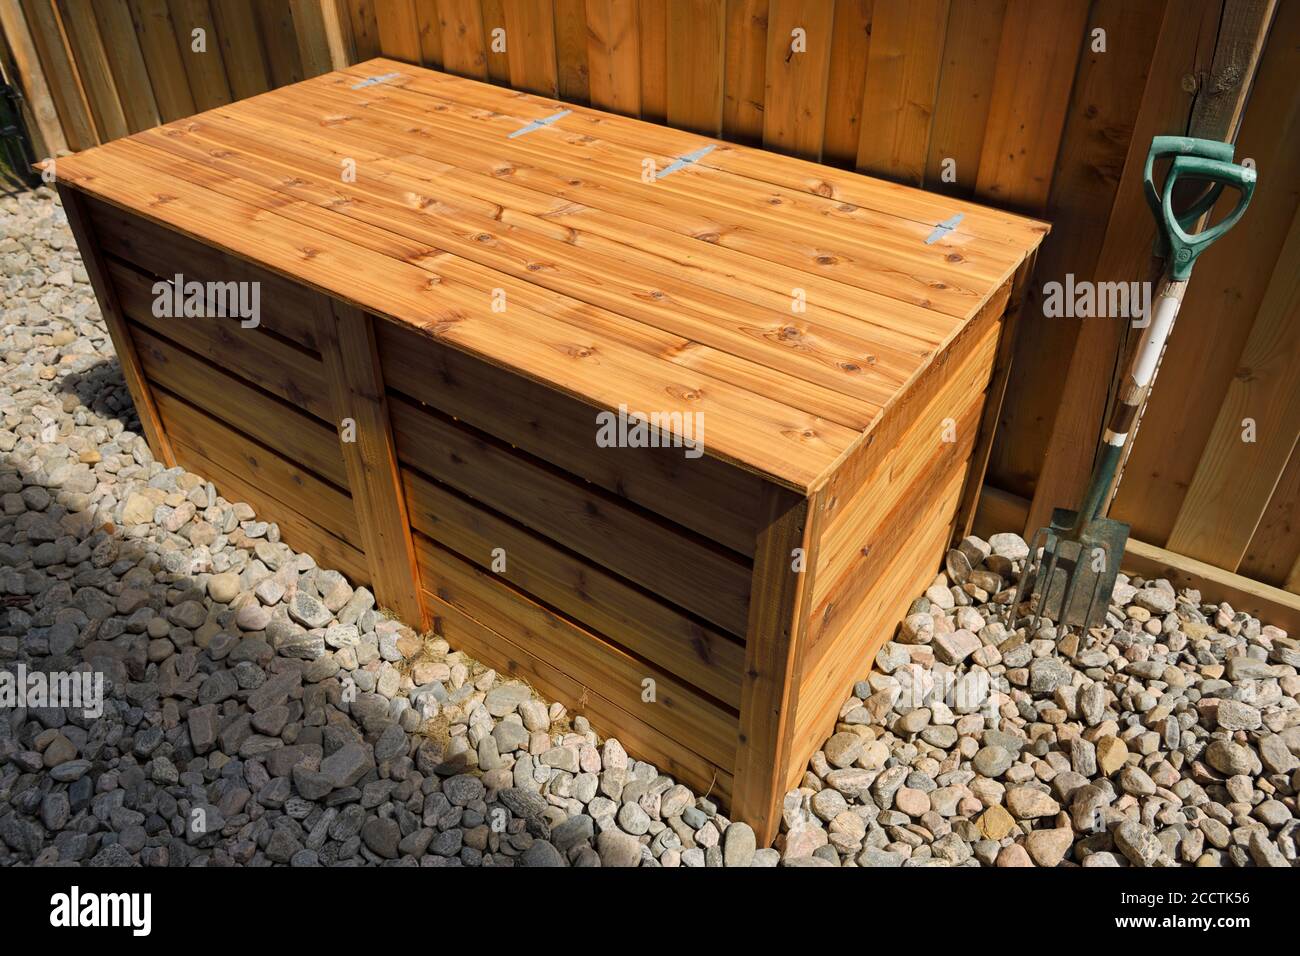 Two bin organic composter made of cedar wood with lid for garden trimmings beside fence on river rocks Stock Photo